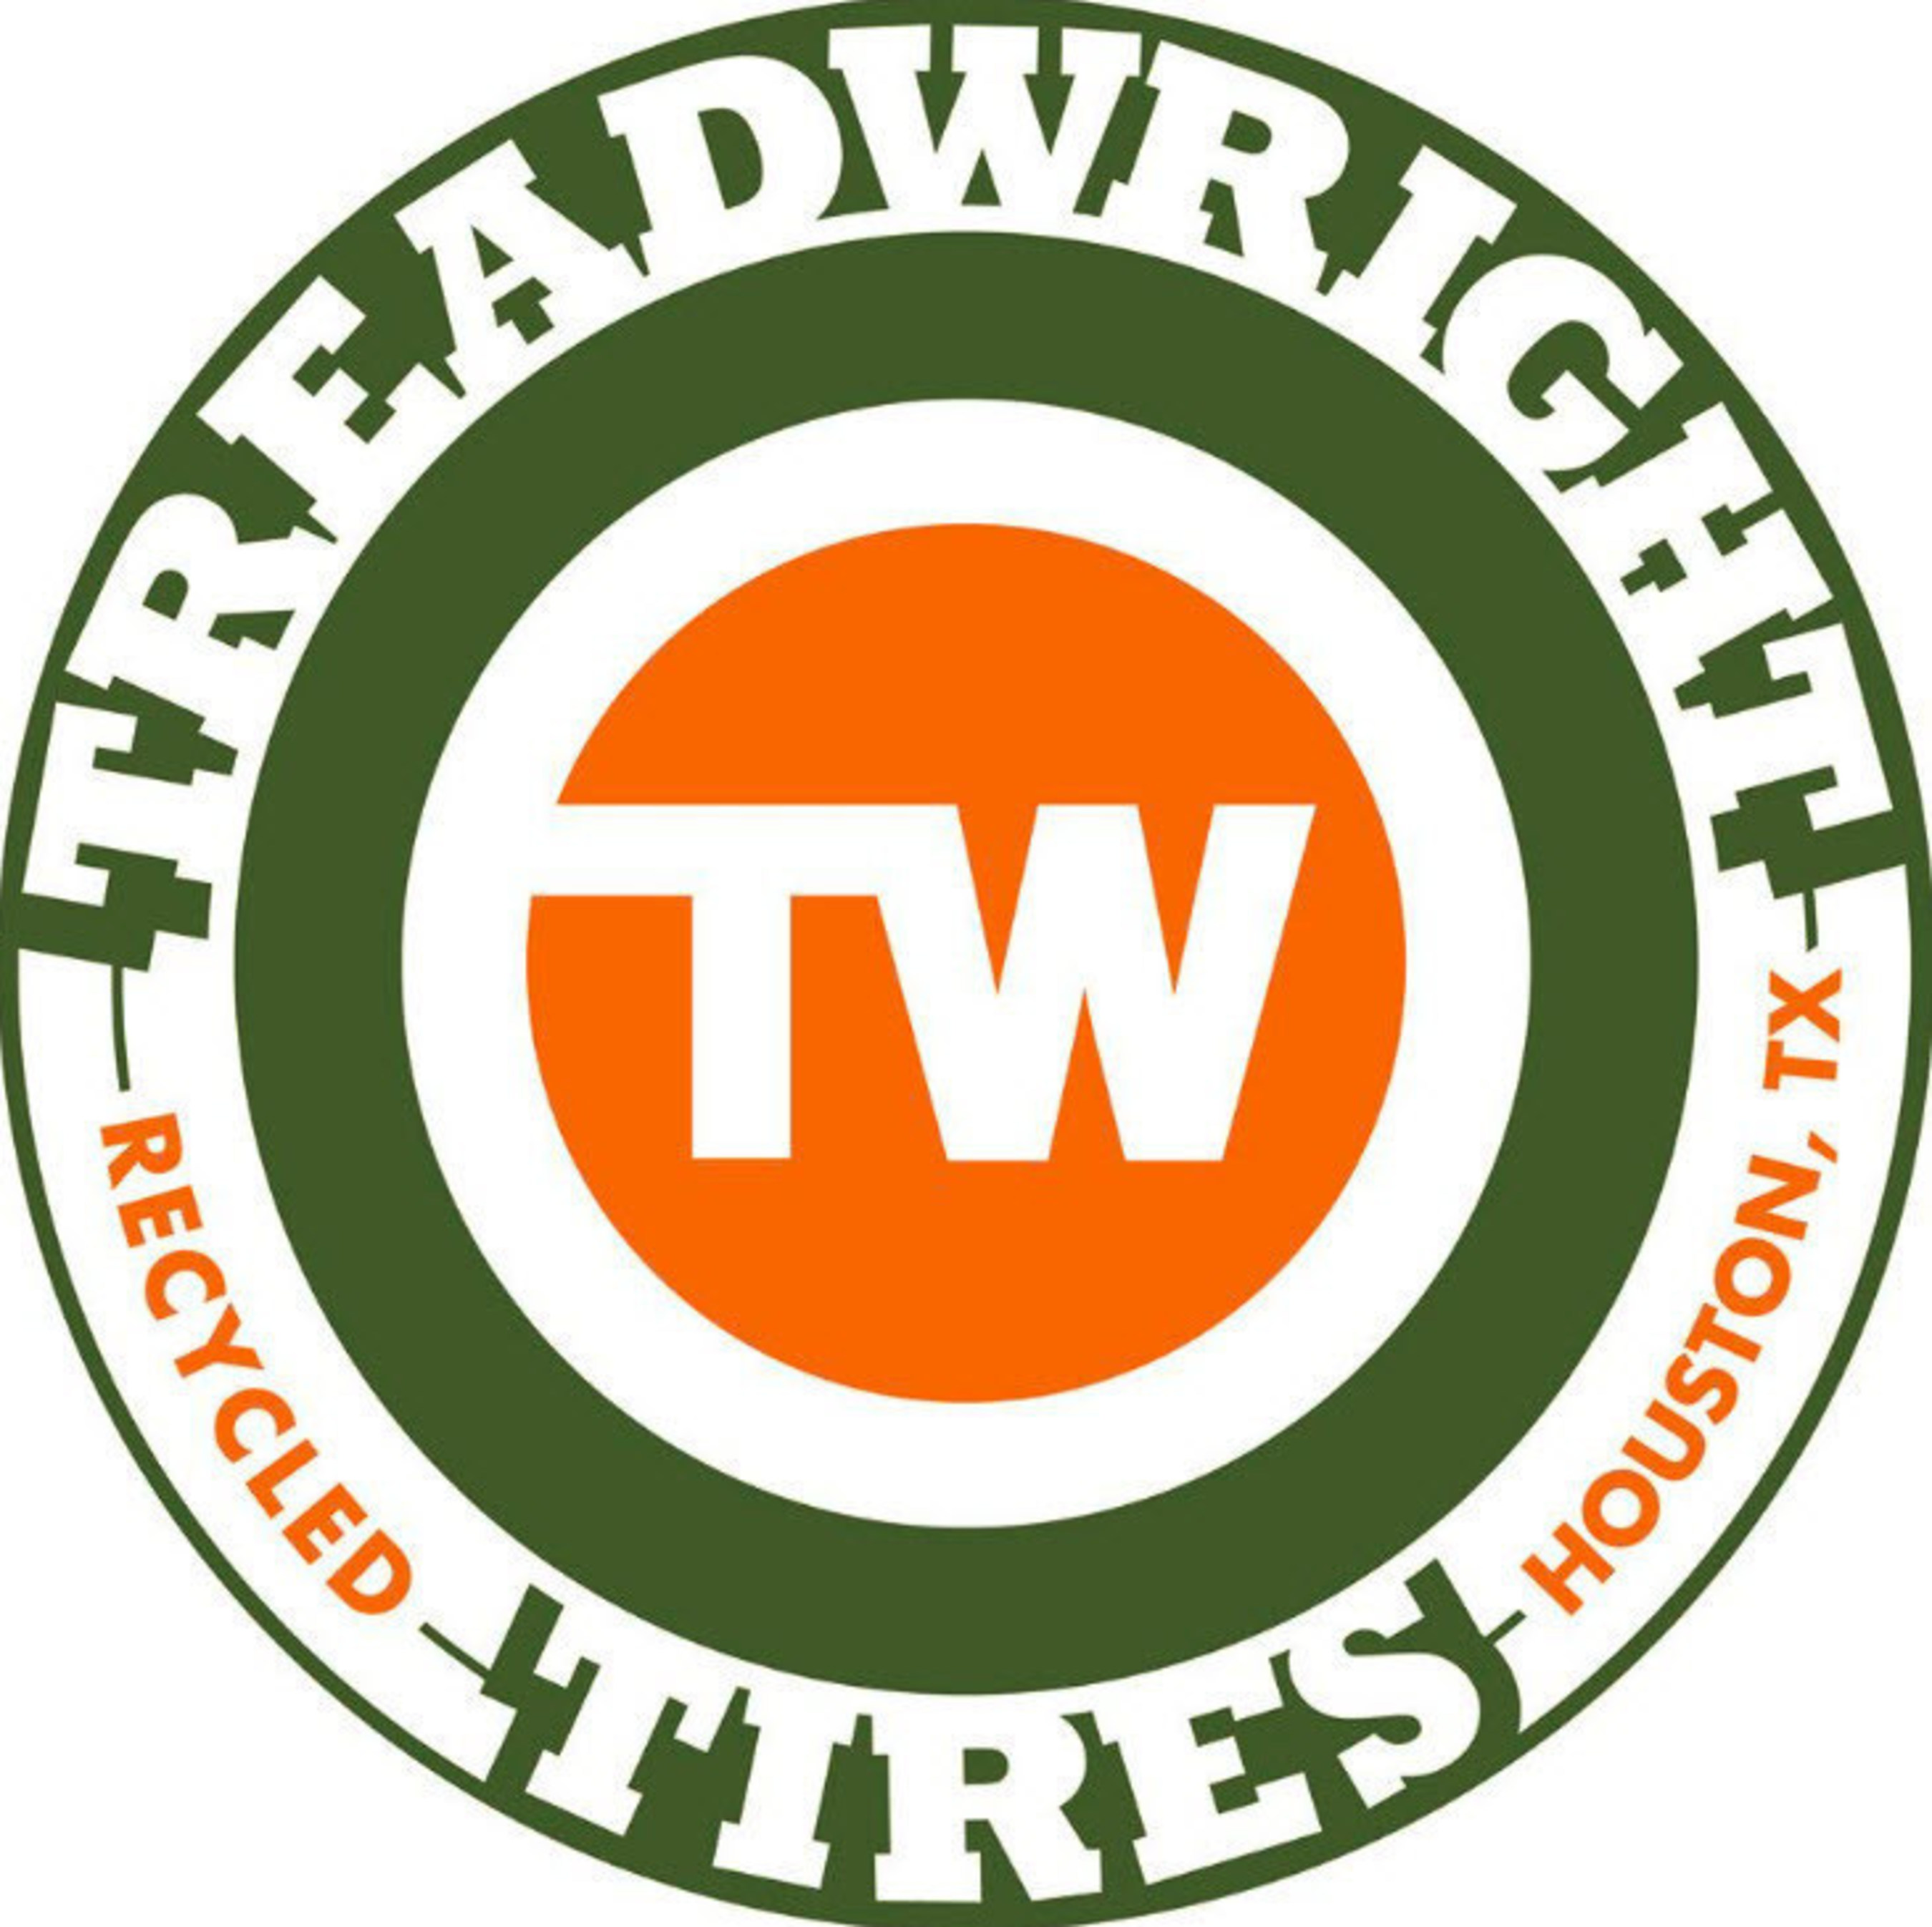 Treadwright Tires is 100% American, 100% rugged